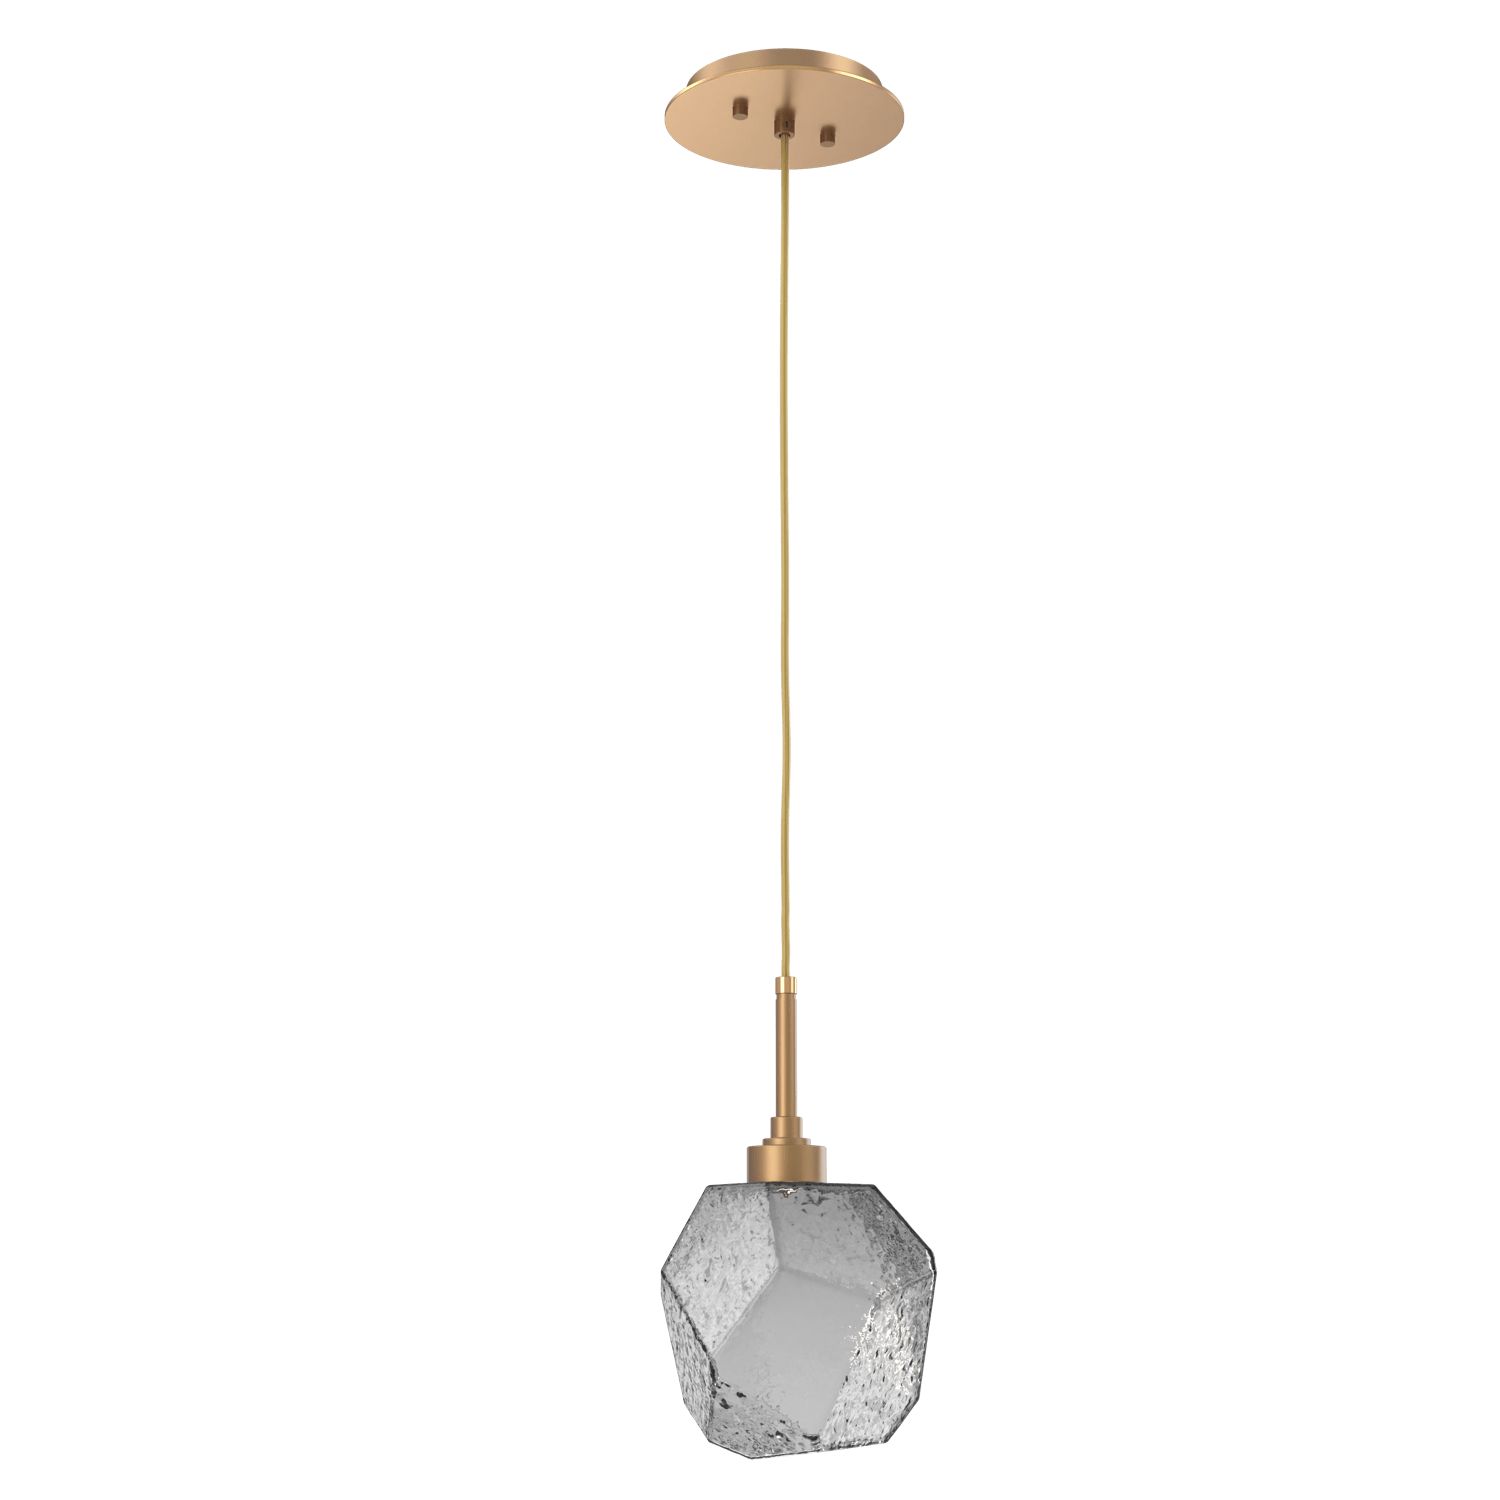 LAB0039-01-NB-S-Hammerton-Studio-Gem-pendant-light-with-novel-brass-finish-and-smoke-blown-glass-shades-and-LED-lamping